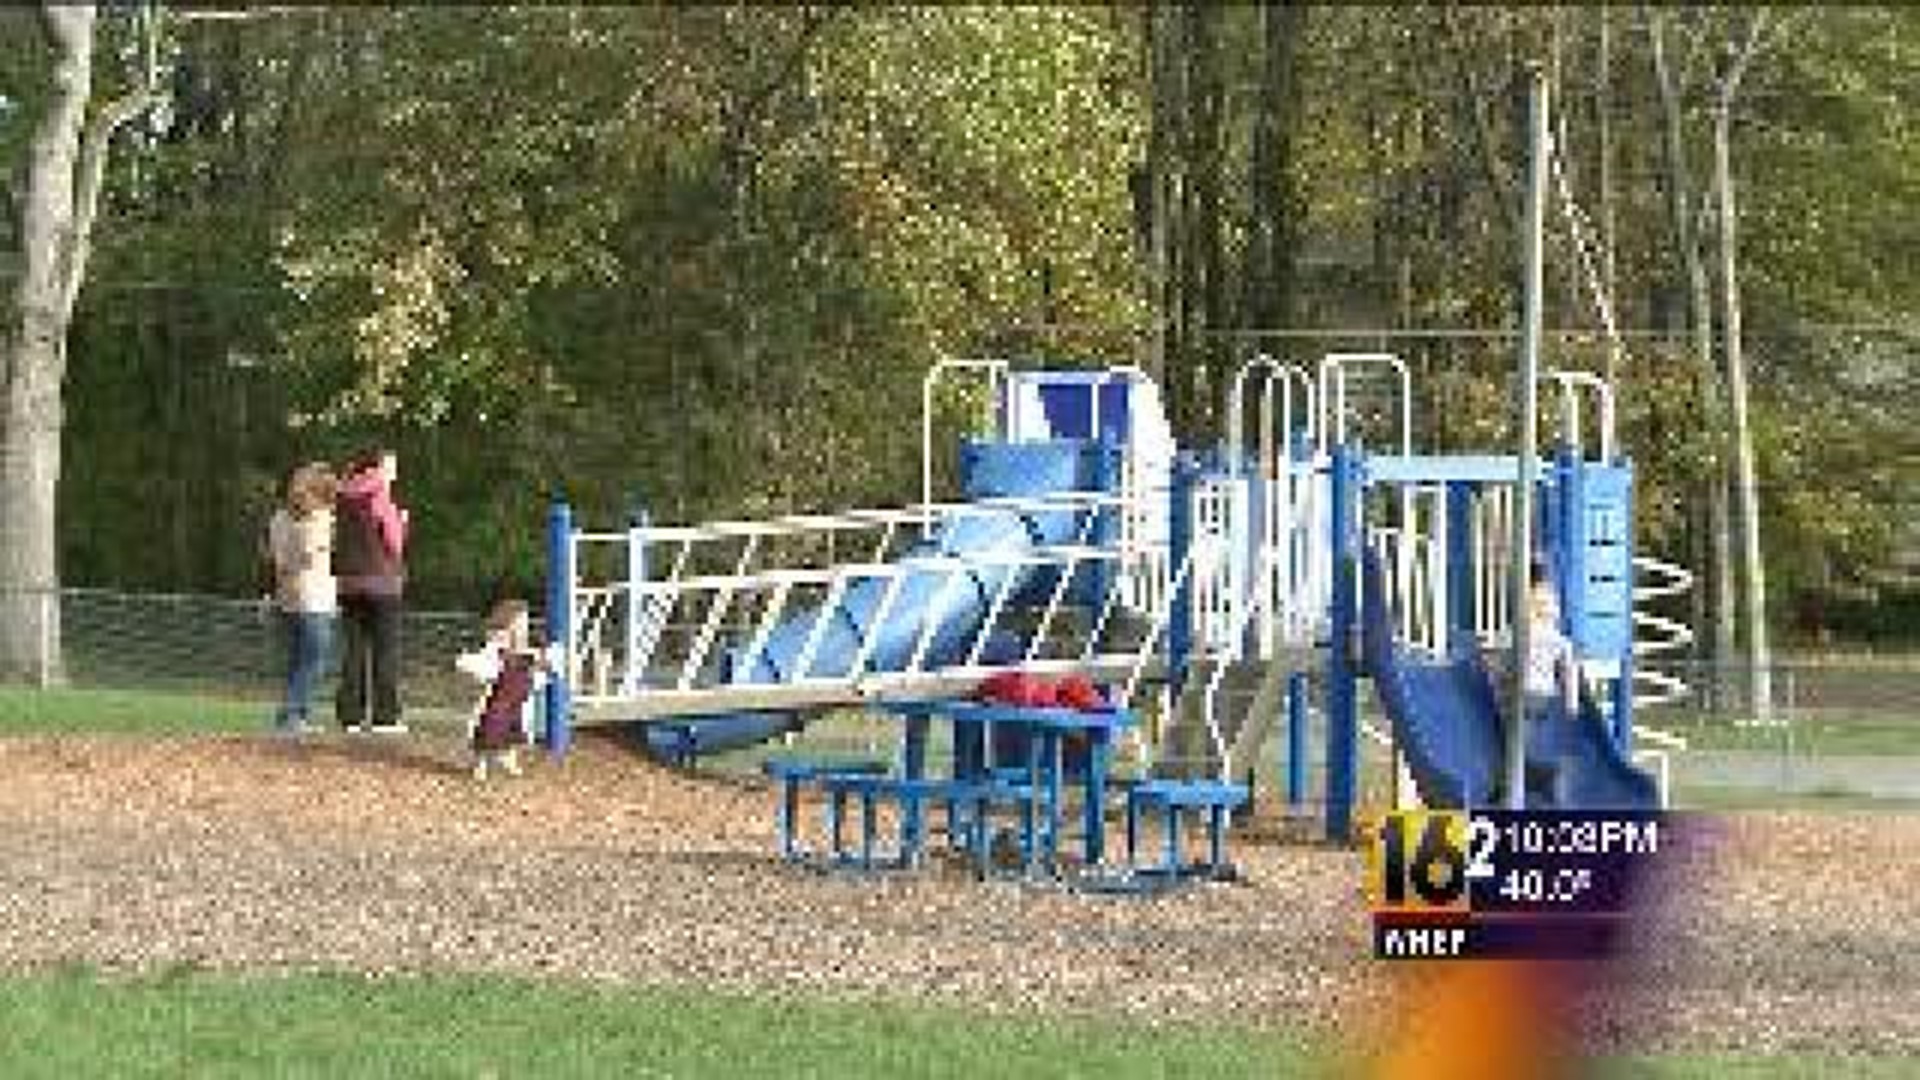 Parents Concerned After Reports of Attempted Child Luring